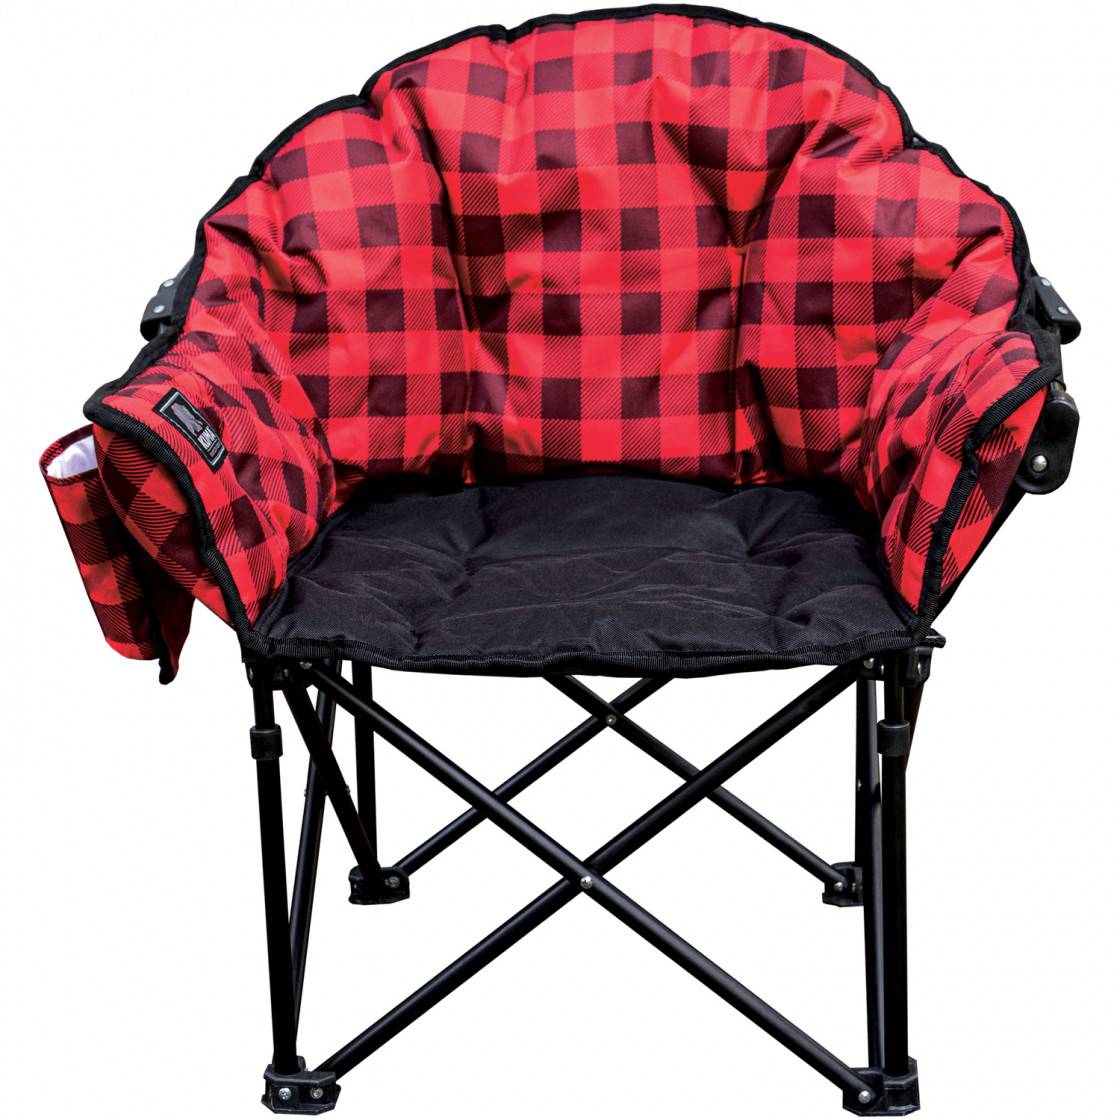 Minimalist Heated Camping Chair Kuma for Large Space